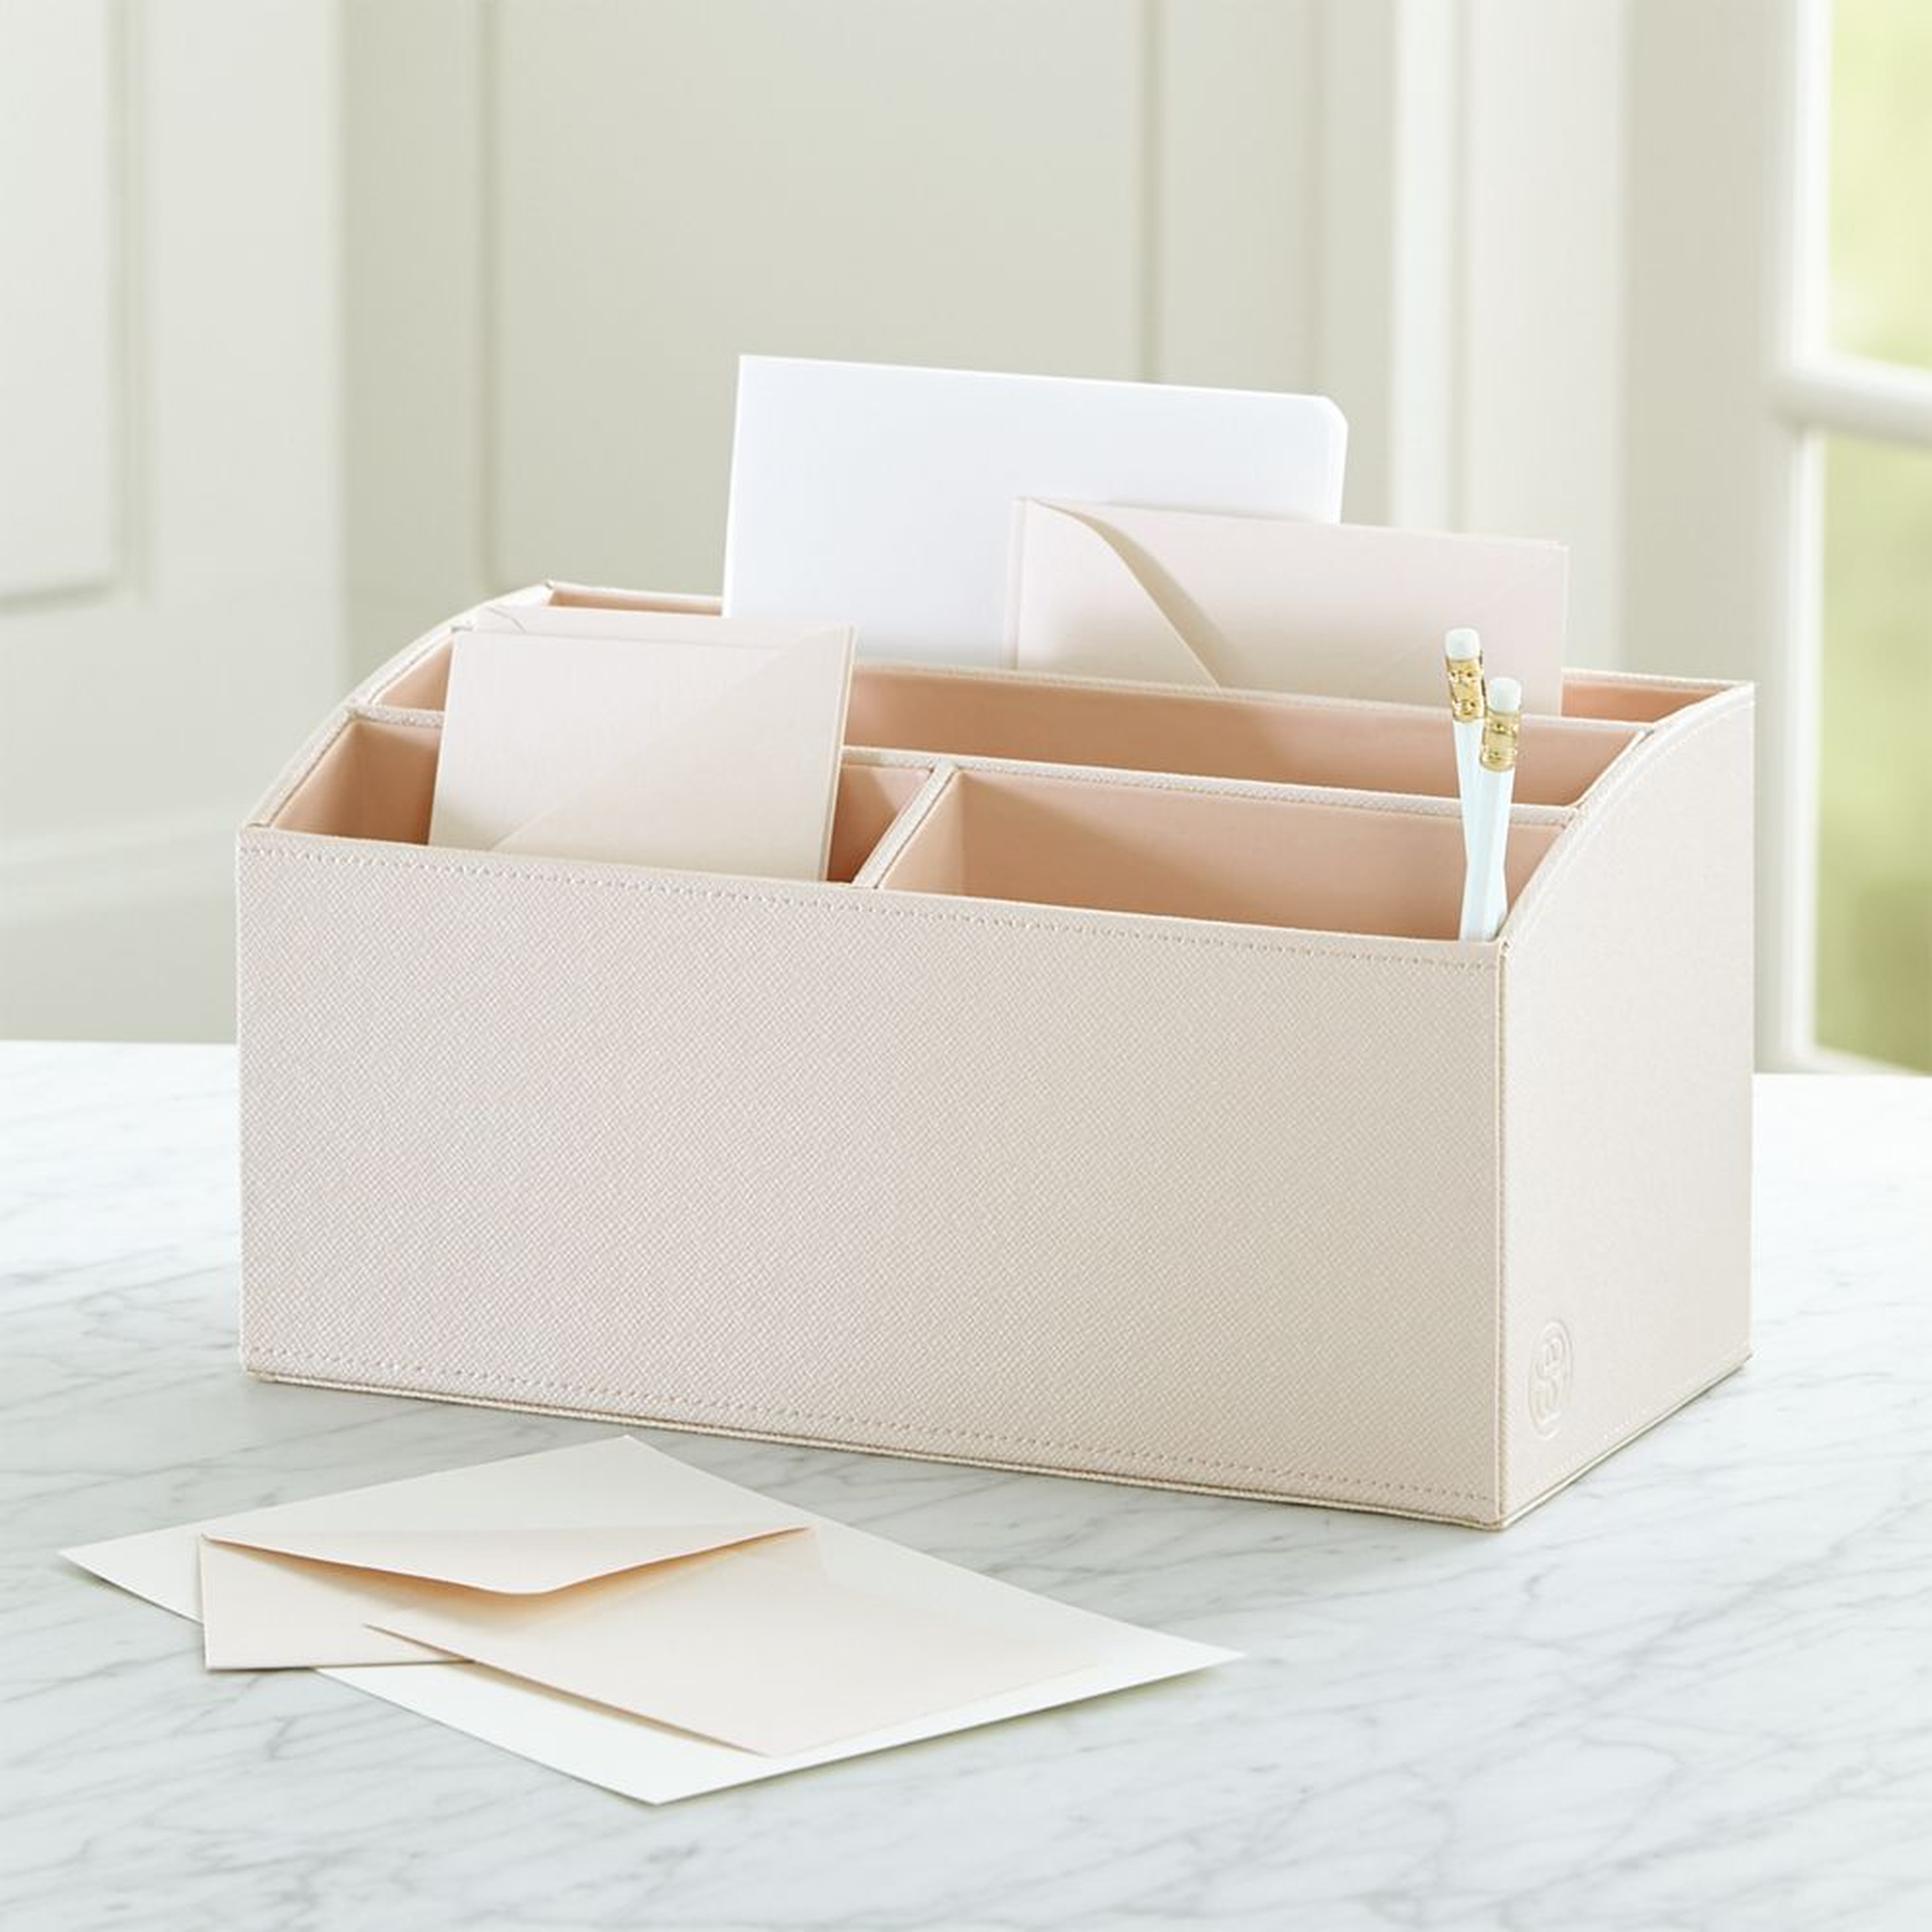 Agency Blush/Pale Pink Desk Organizer - Crate and Barrel